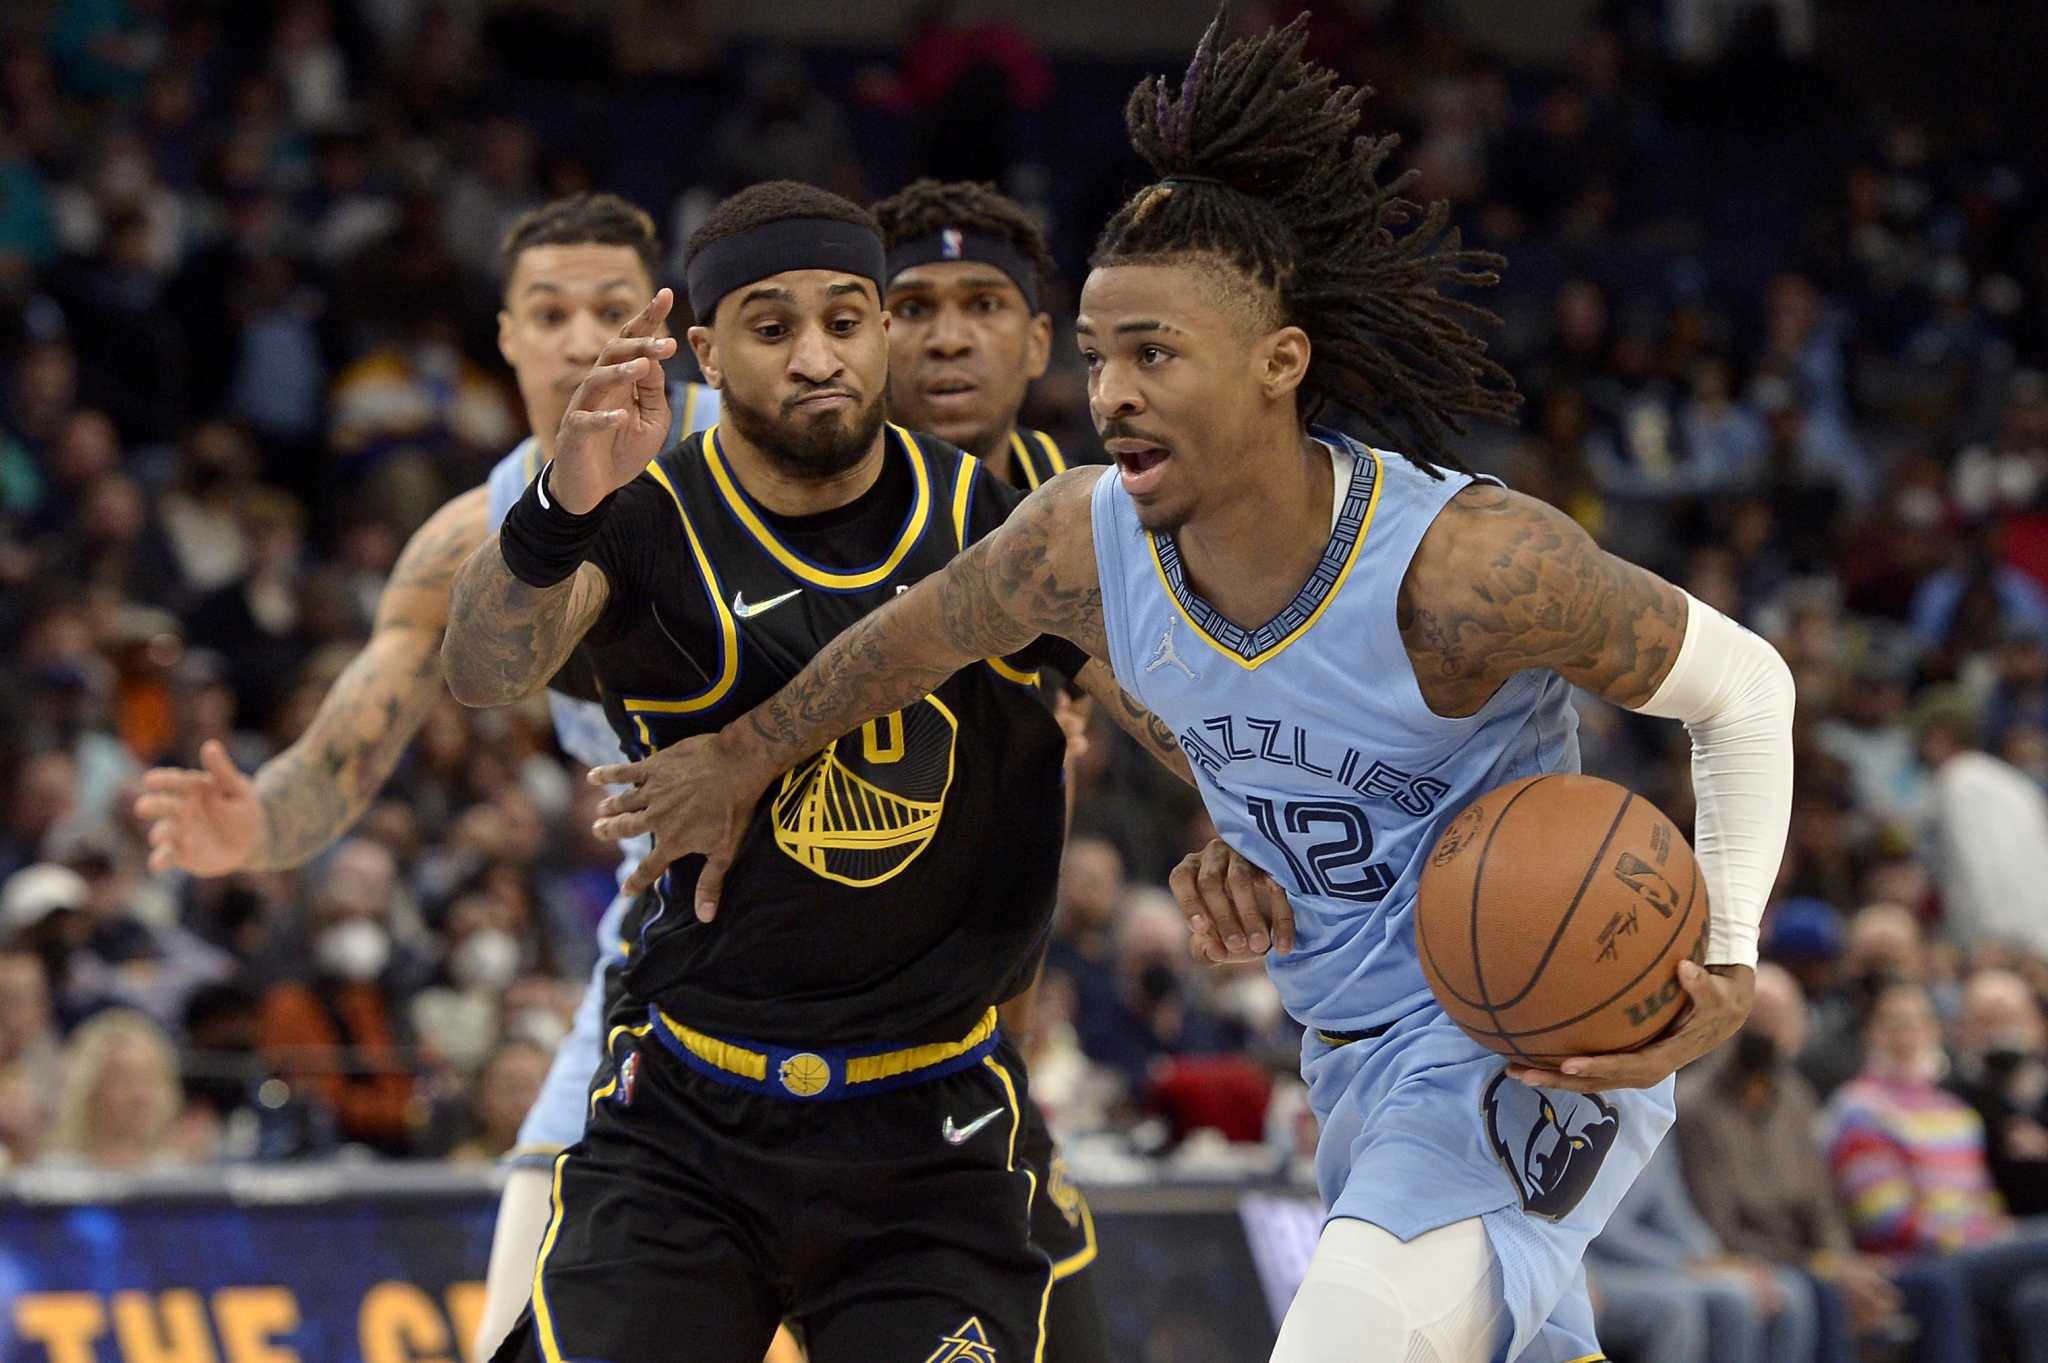 Warriors’ Curry has triple-double, but Grizzlies win 10th straight, 116-108